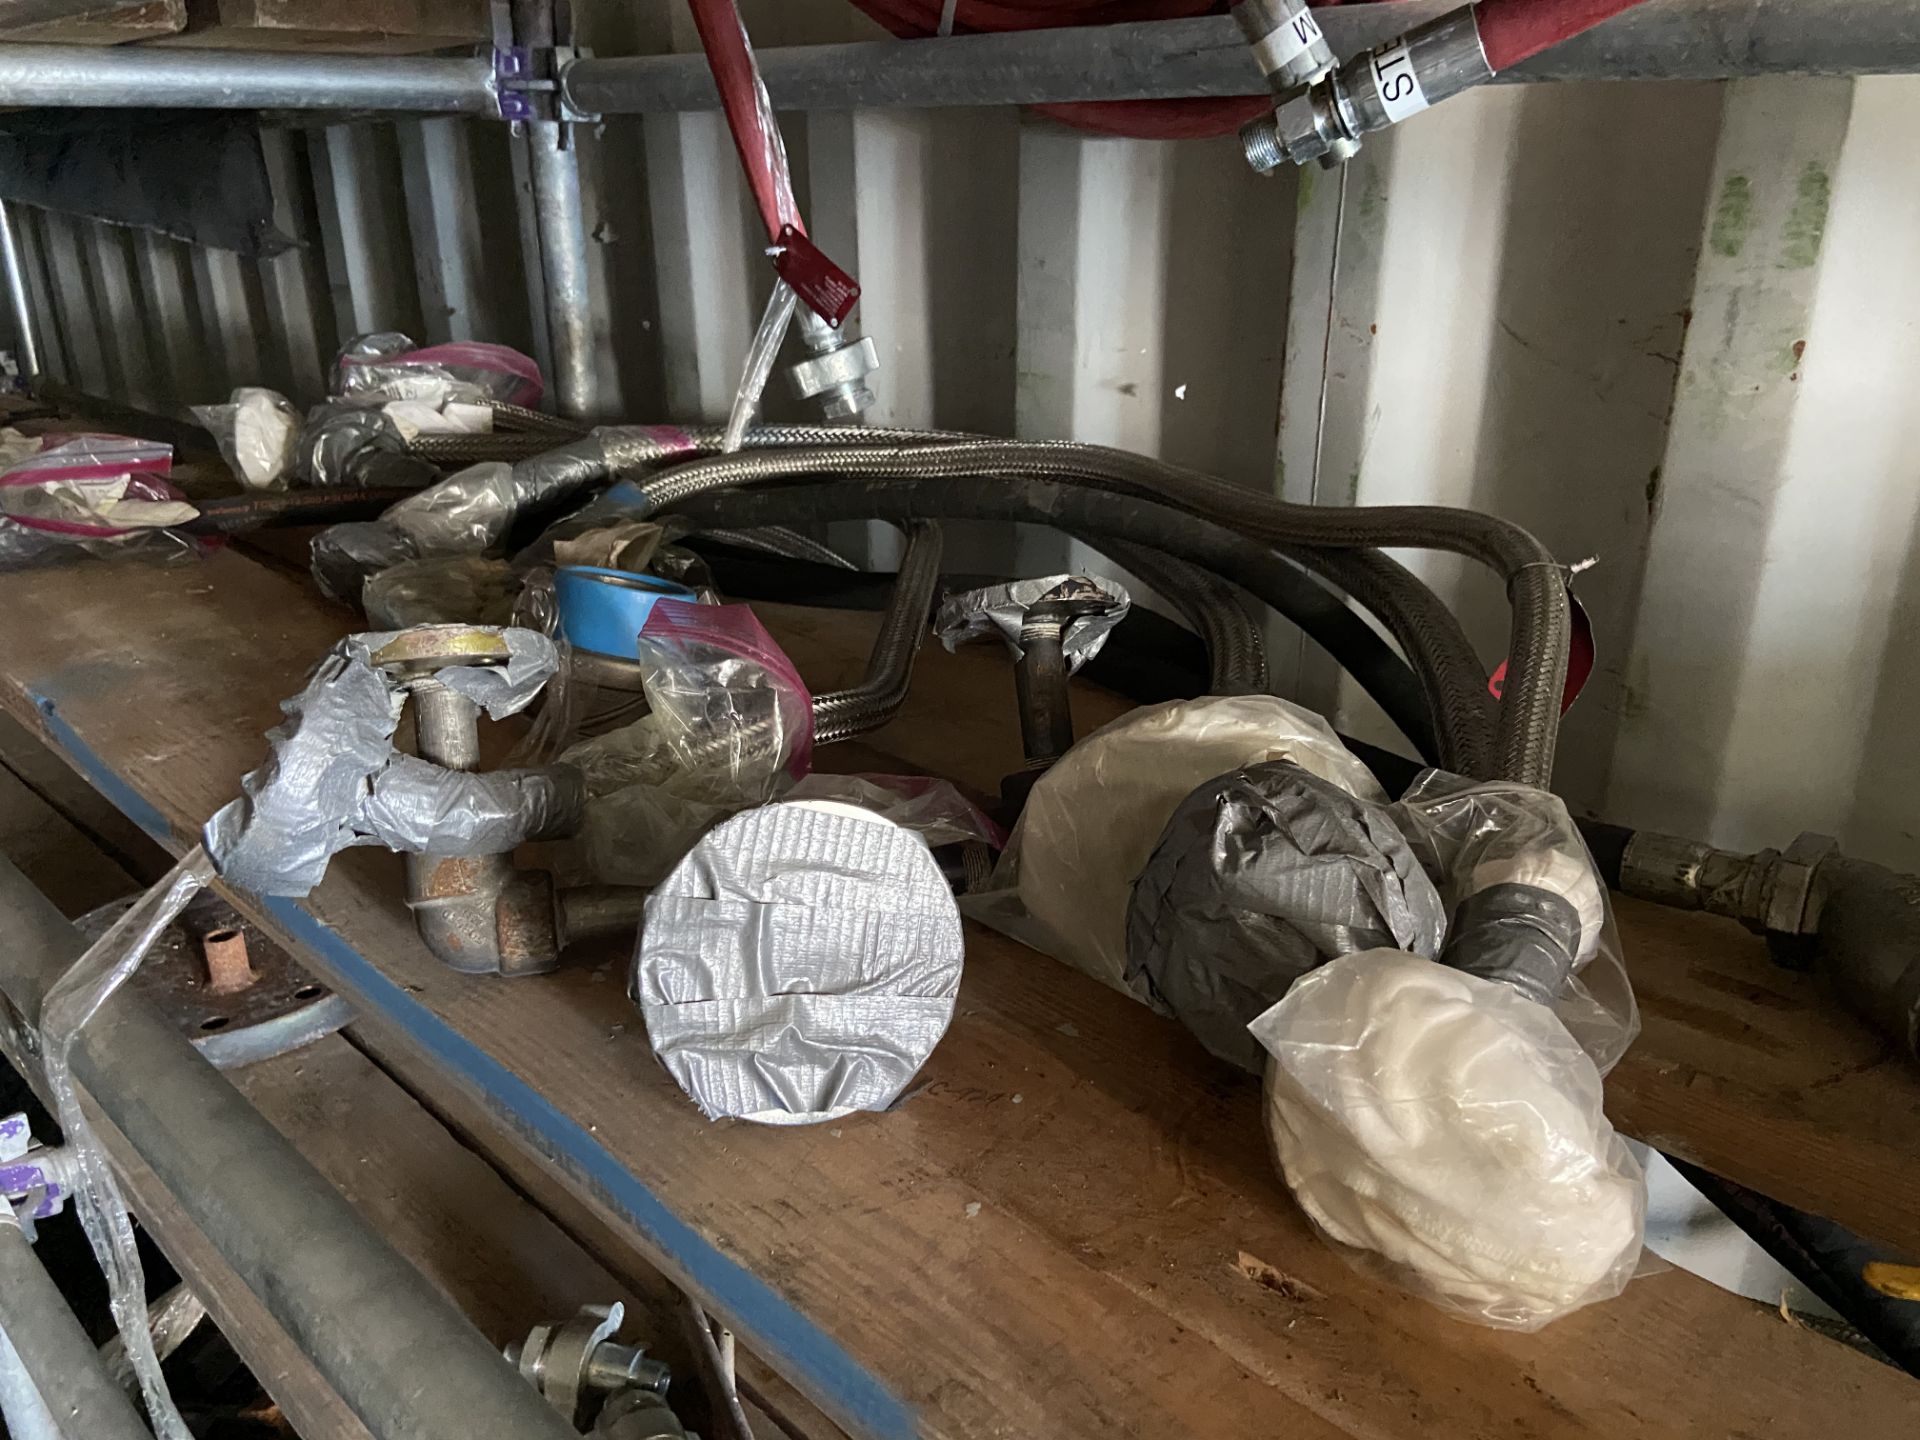 Contents of Shipping Container: Ashworth Actuator Valve, Stainless Steel Braided Hose, Miscellaneous - Image 11 of 14